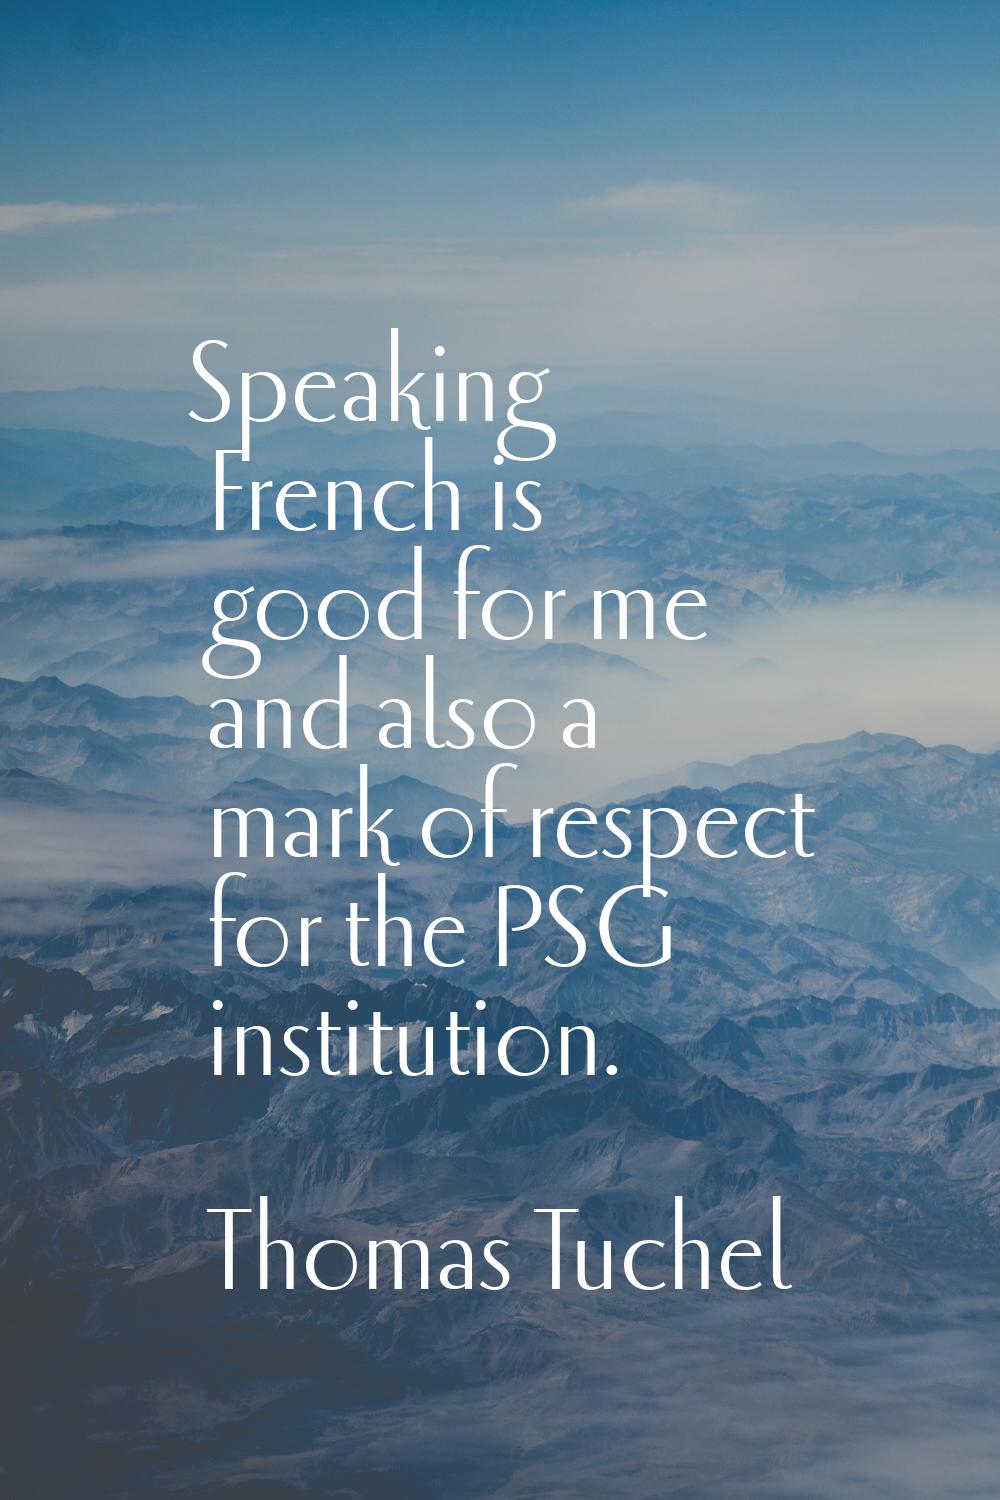 Speaking French is good for me and also a mark of respect for the PSG institution.